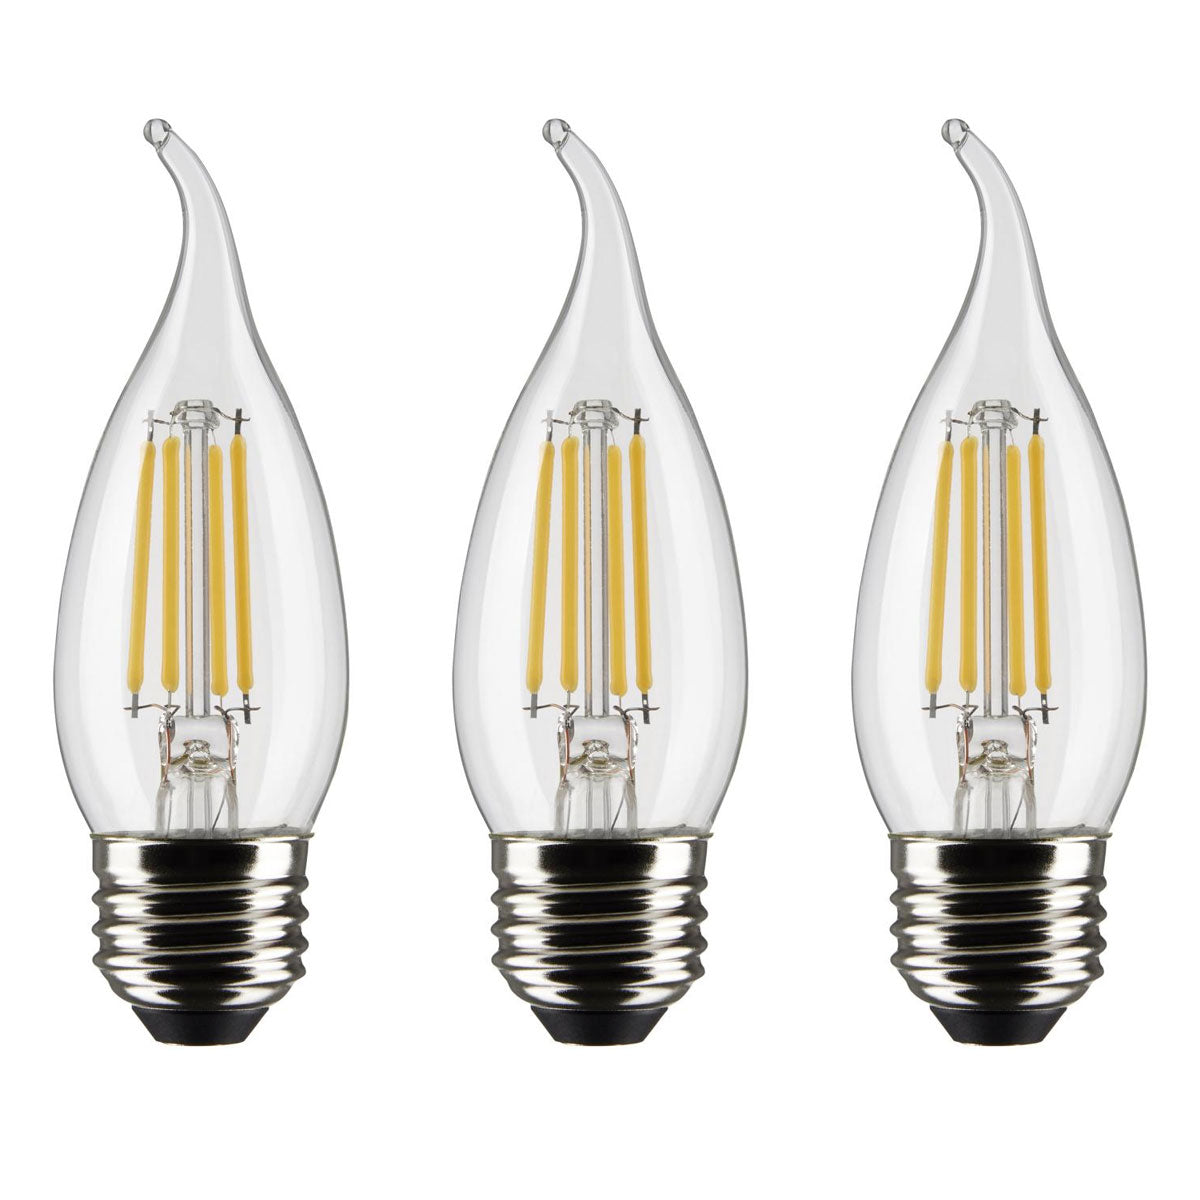 3PK - 4.5w CA11 Candle LED 2700K Medium Base Non-Dimmable - 40w equiv